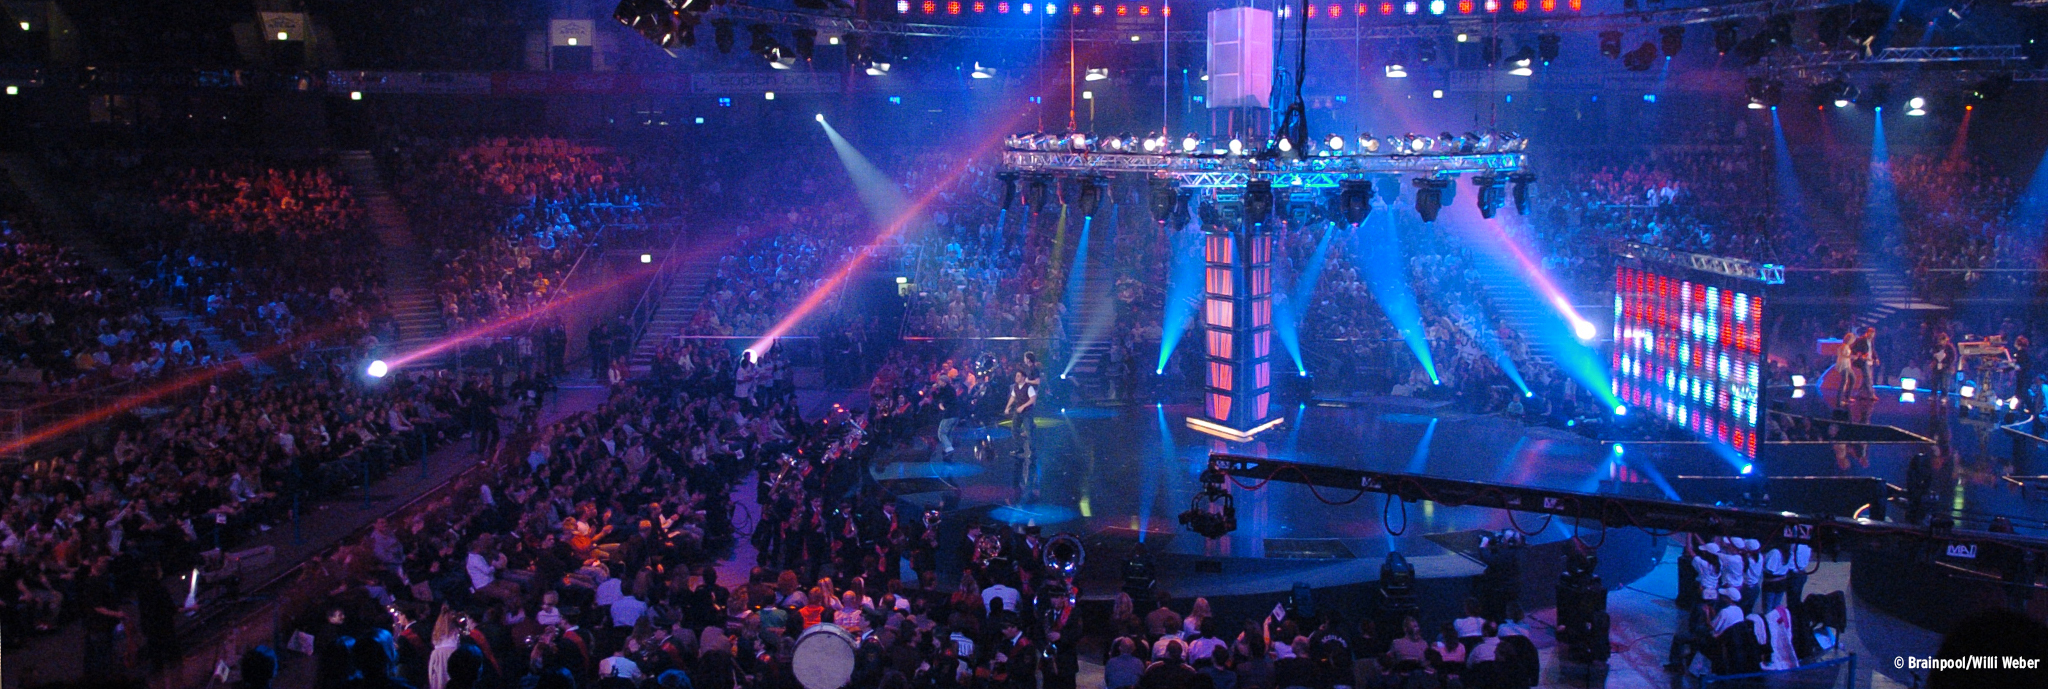 2005 Bundesvision Song Contest